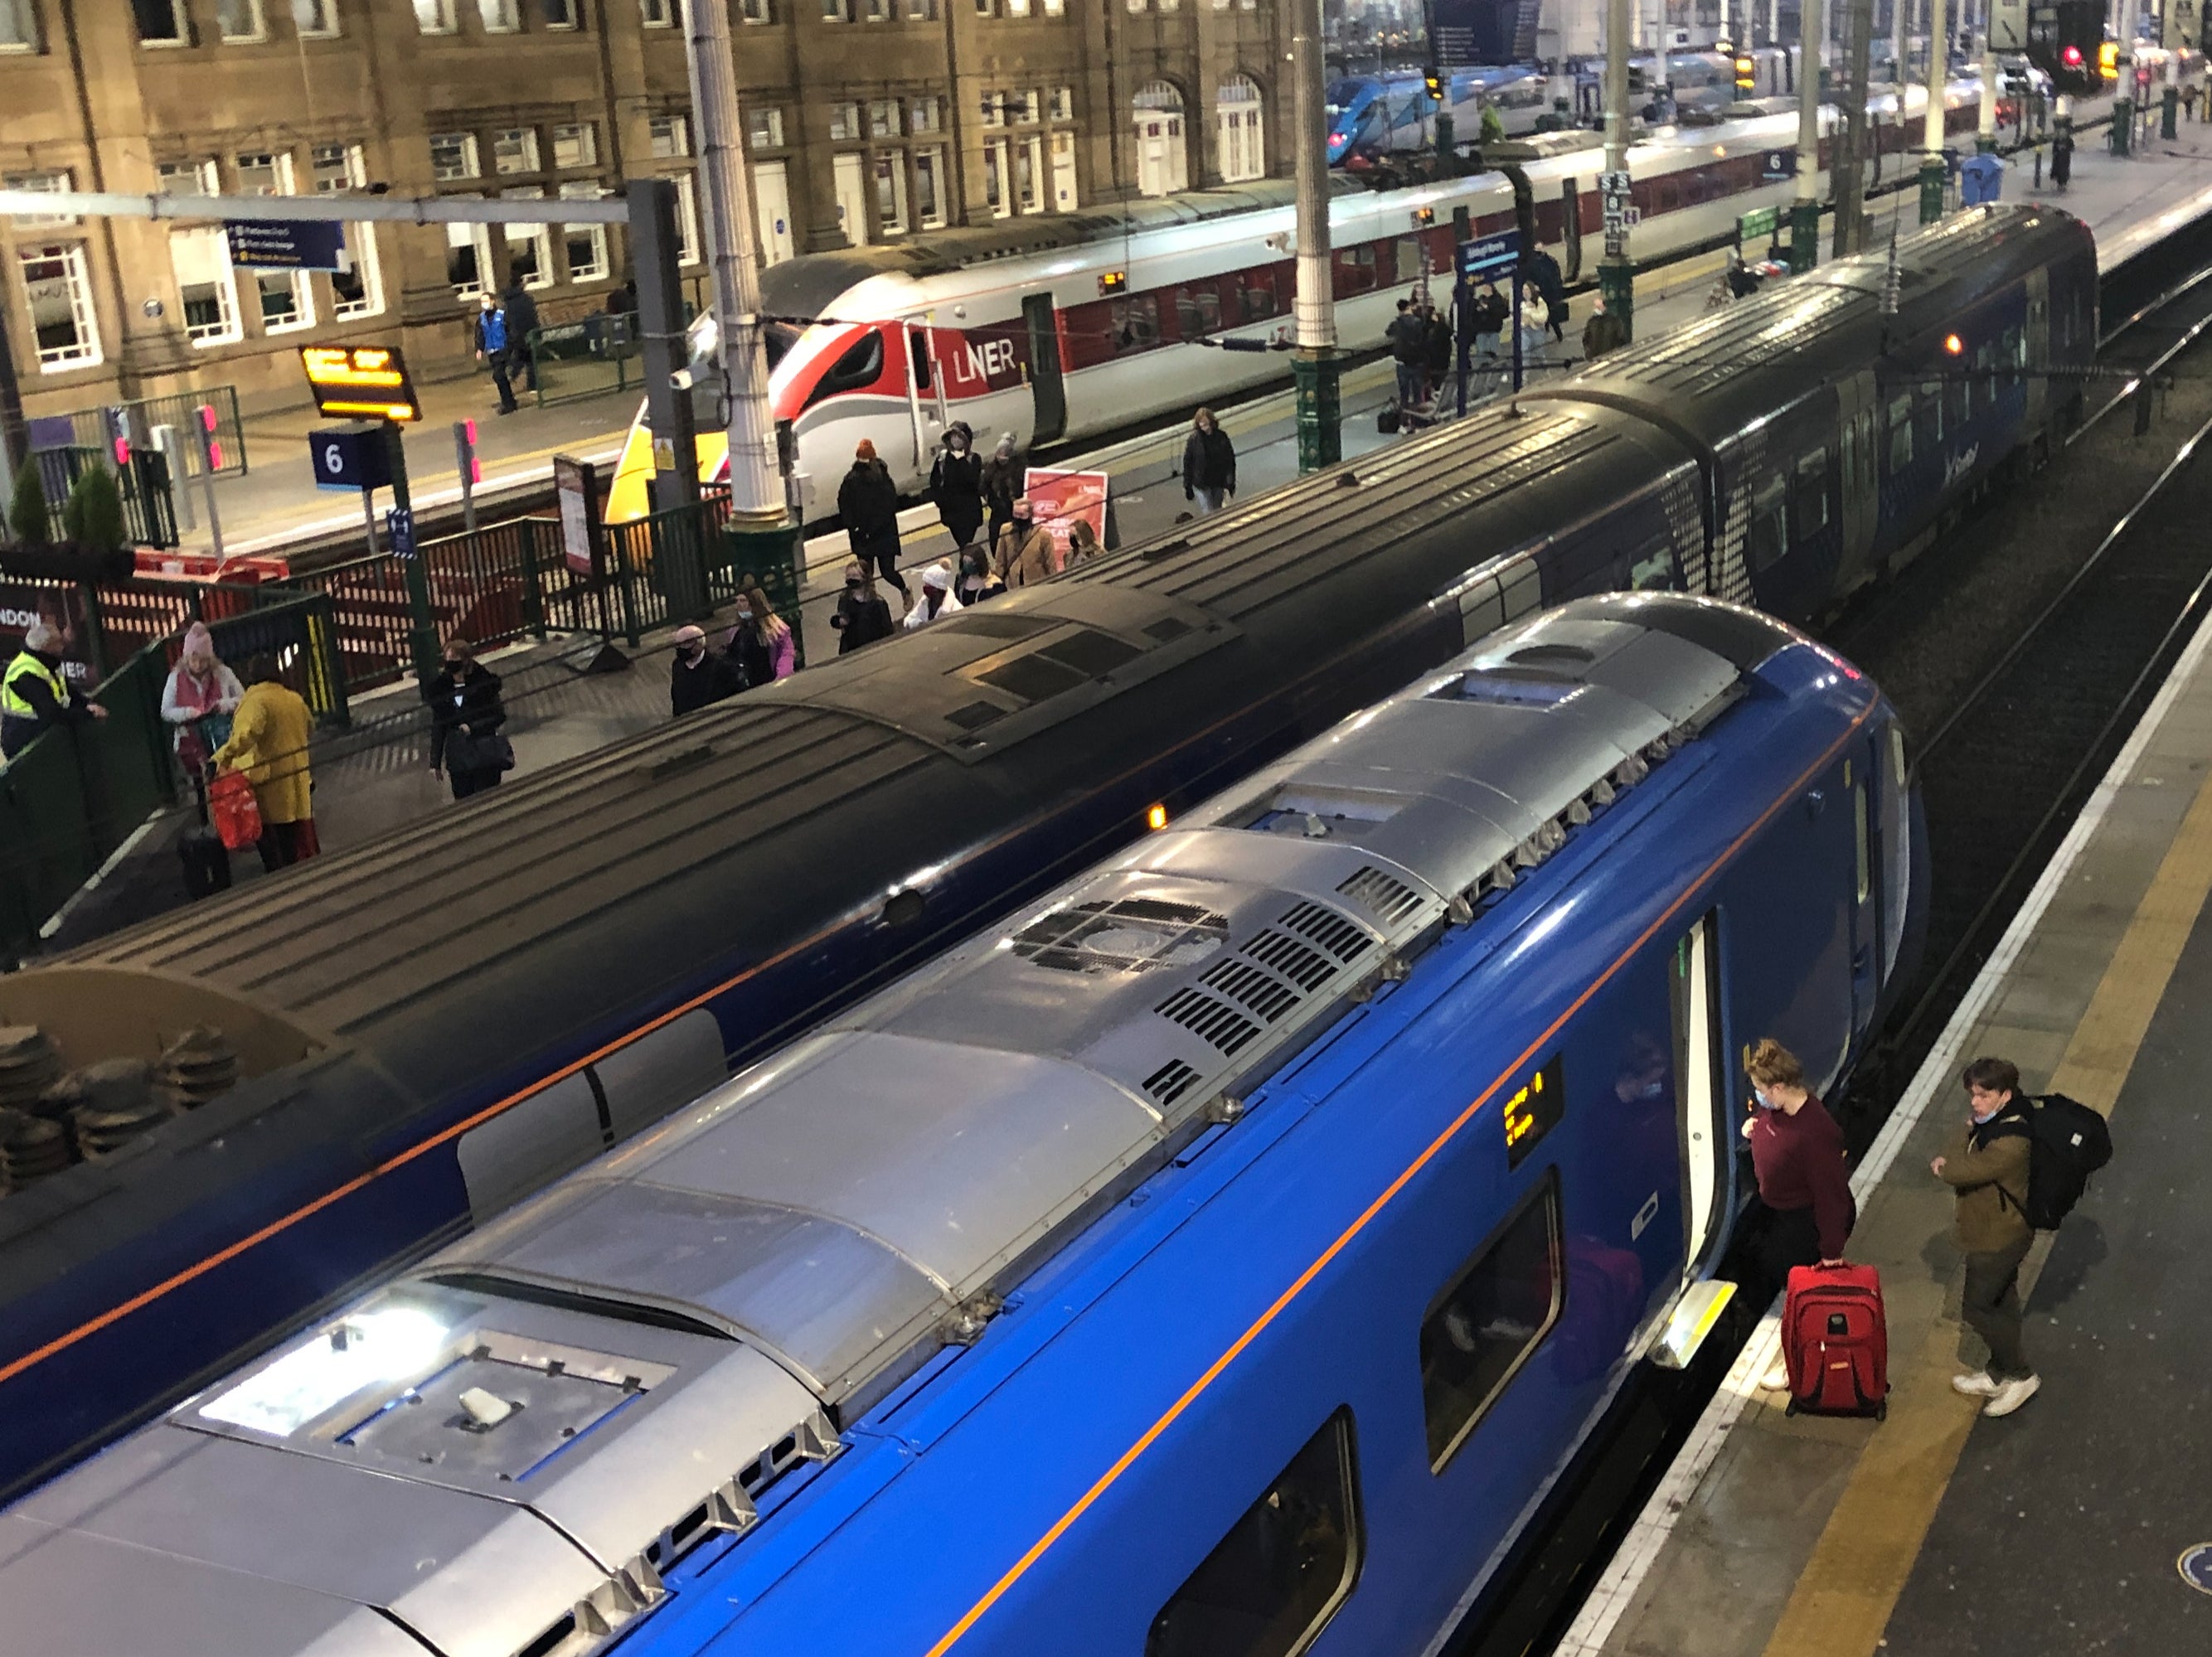 Departing early: the last LNER Edinburgh-London train before Christmas on 24 December leaves at 8am (top), while the final Lumo service (bottom) is less than an hour later